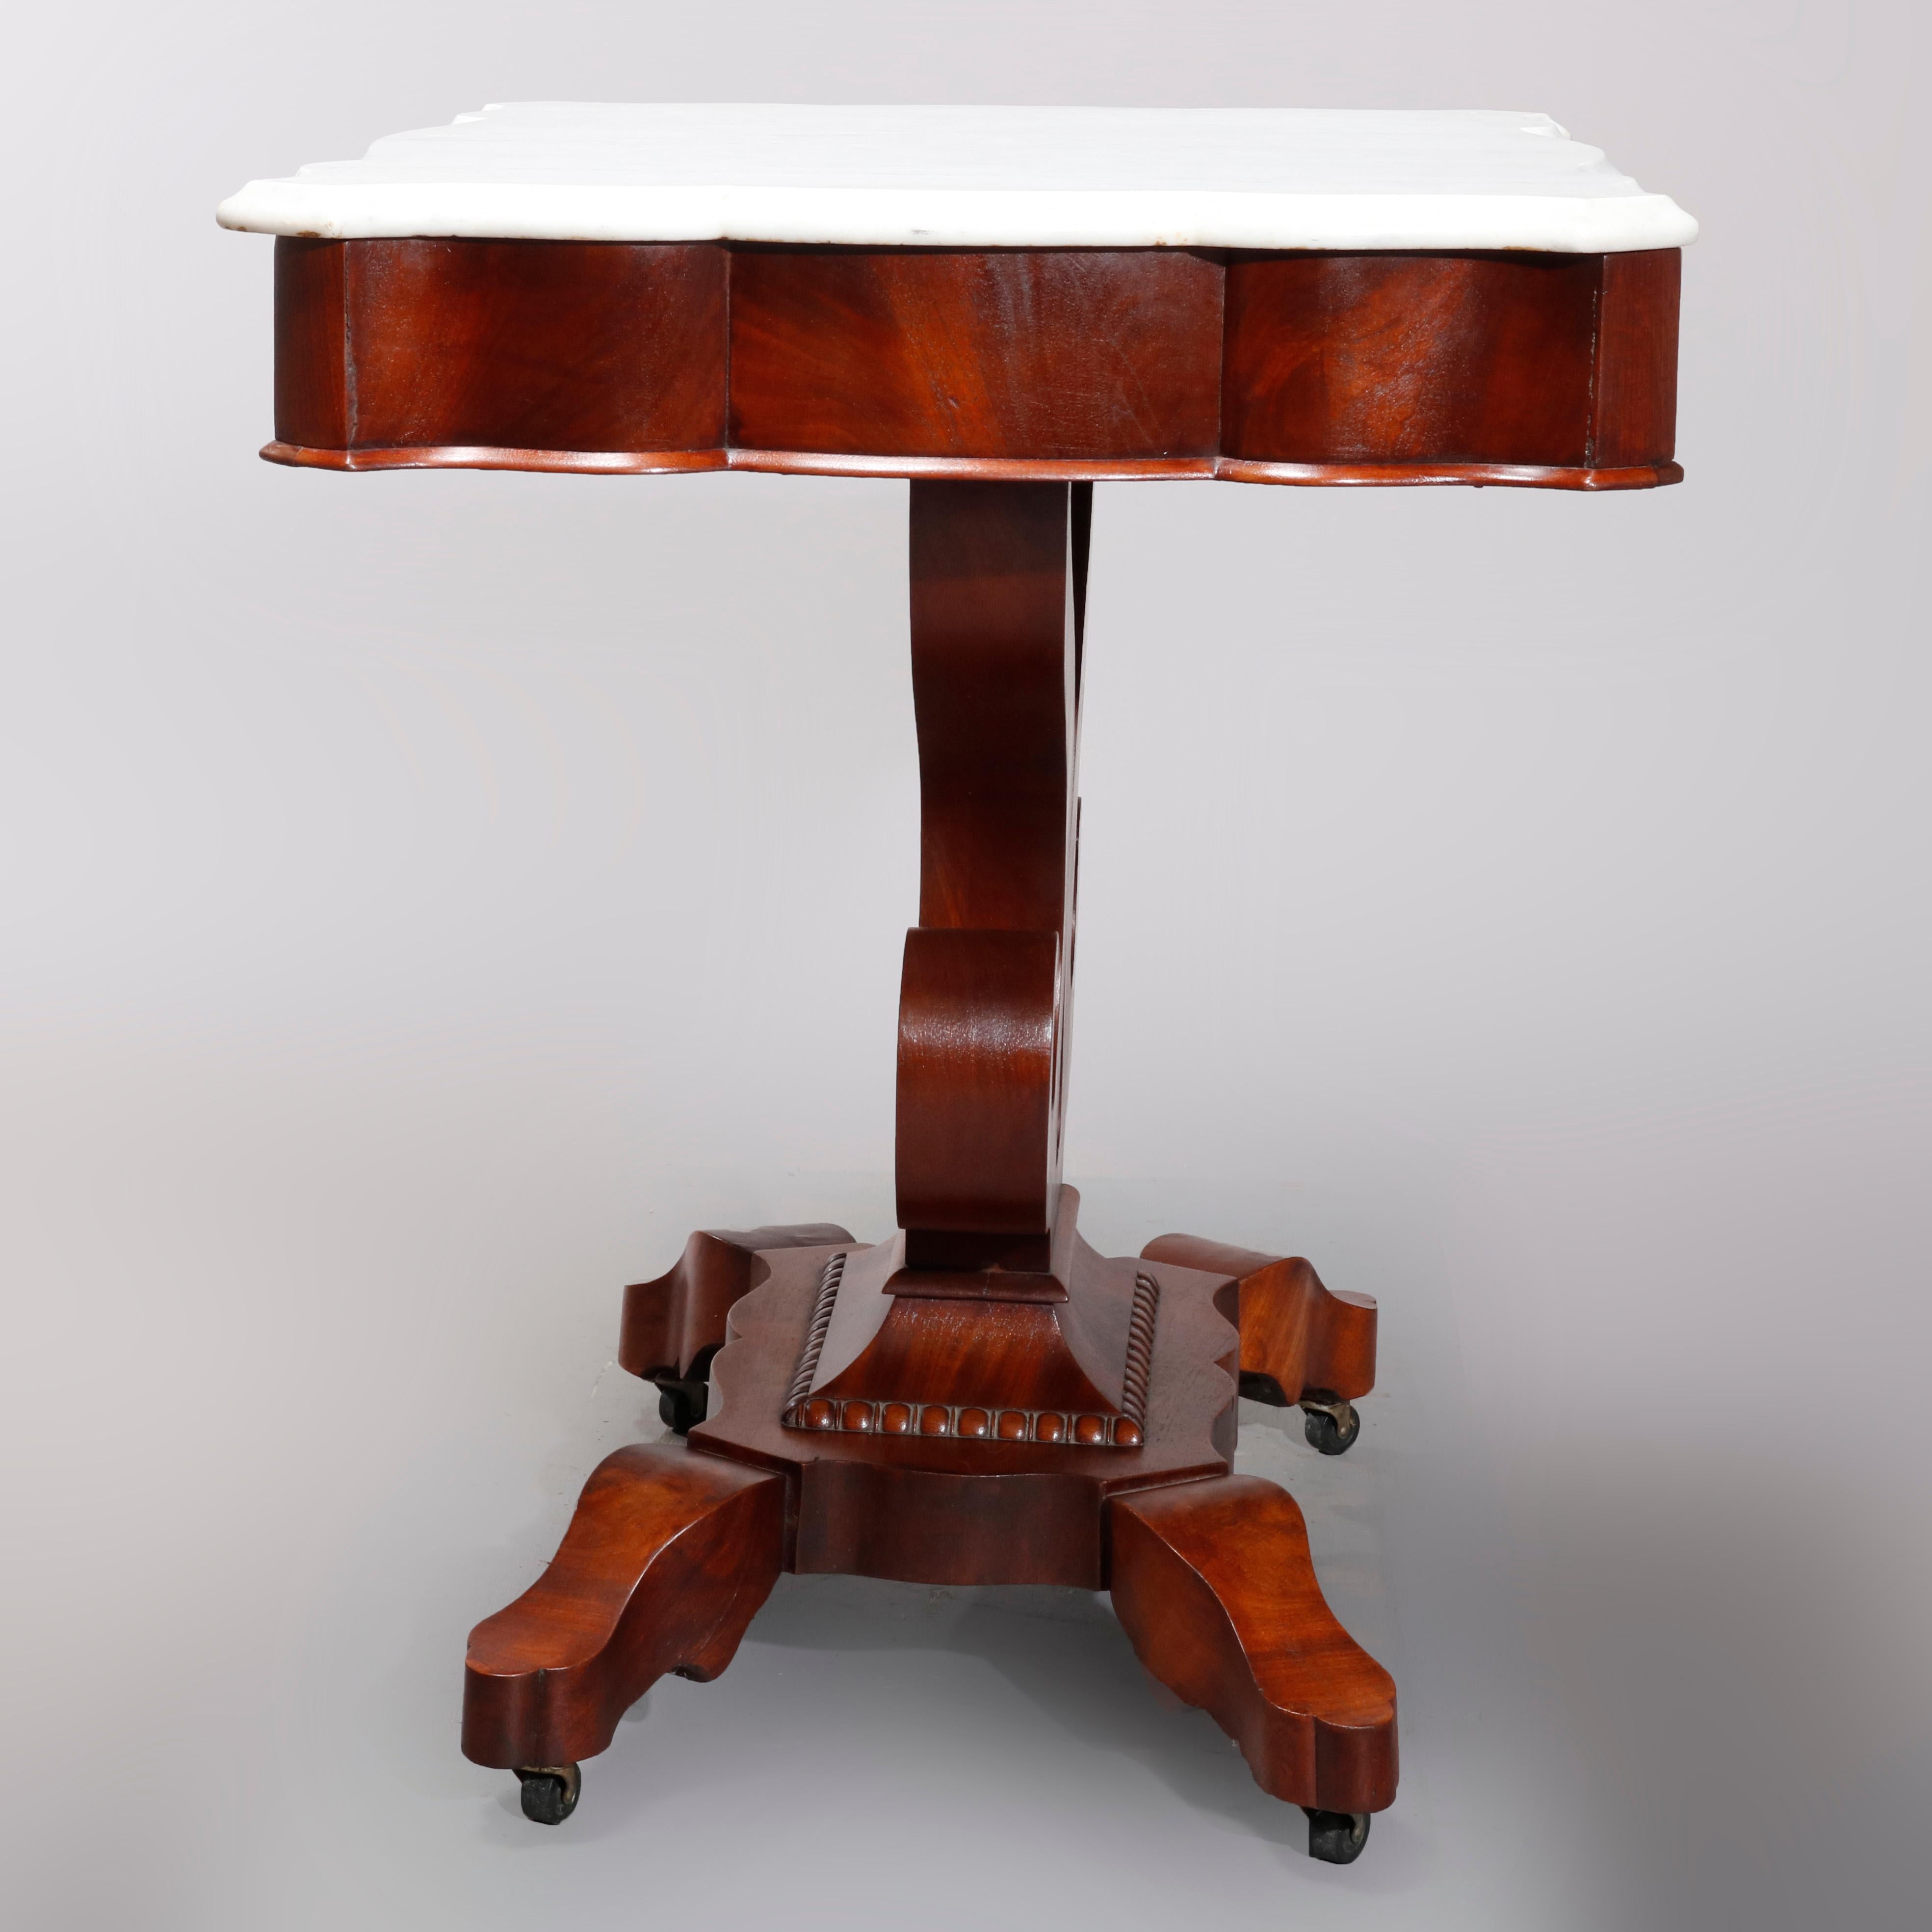 Carved Quervelle School American Empire Flame Mahogany Marble-Top Table, circa 1880